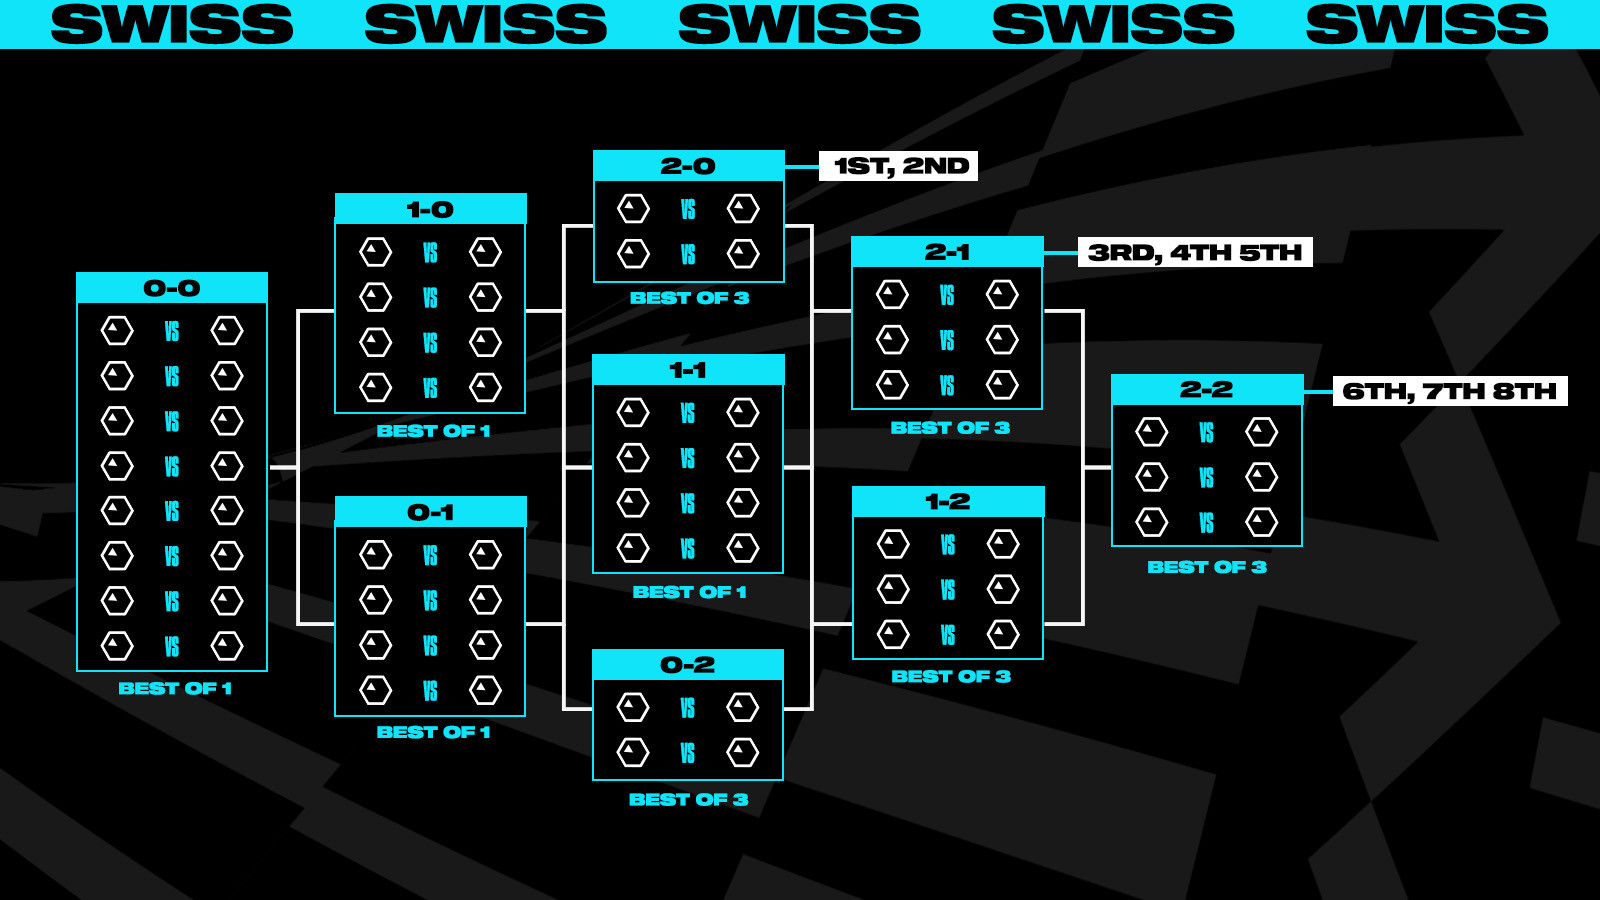 (The Swiss Stage, System of the Worlds 2023 Source: Riot Games)